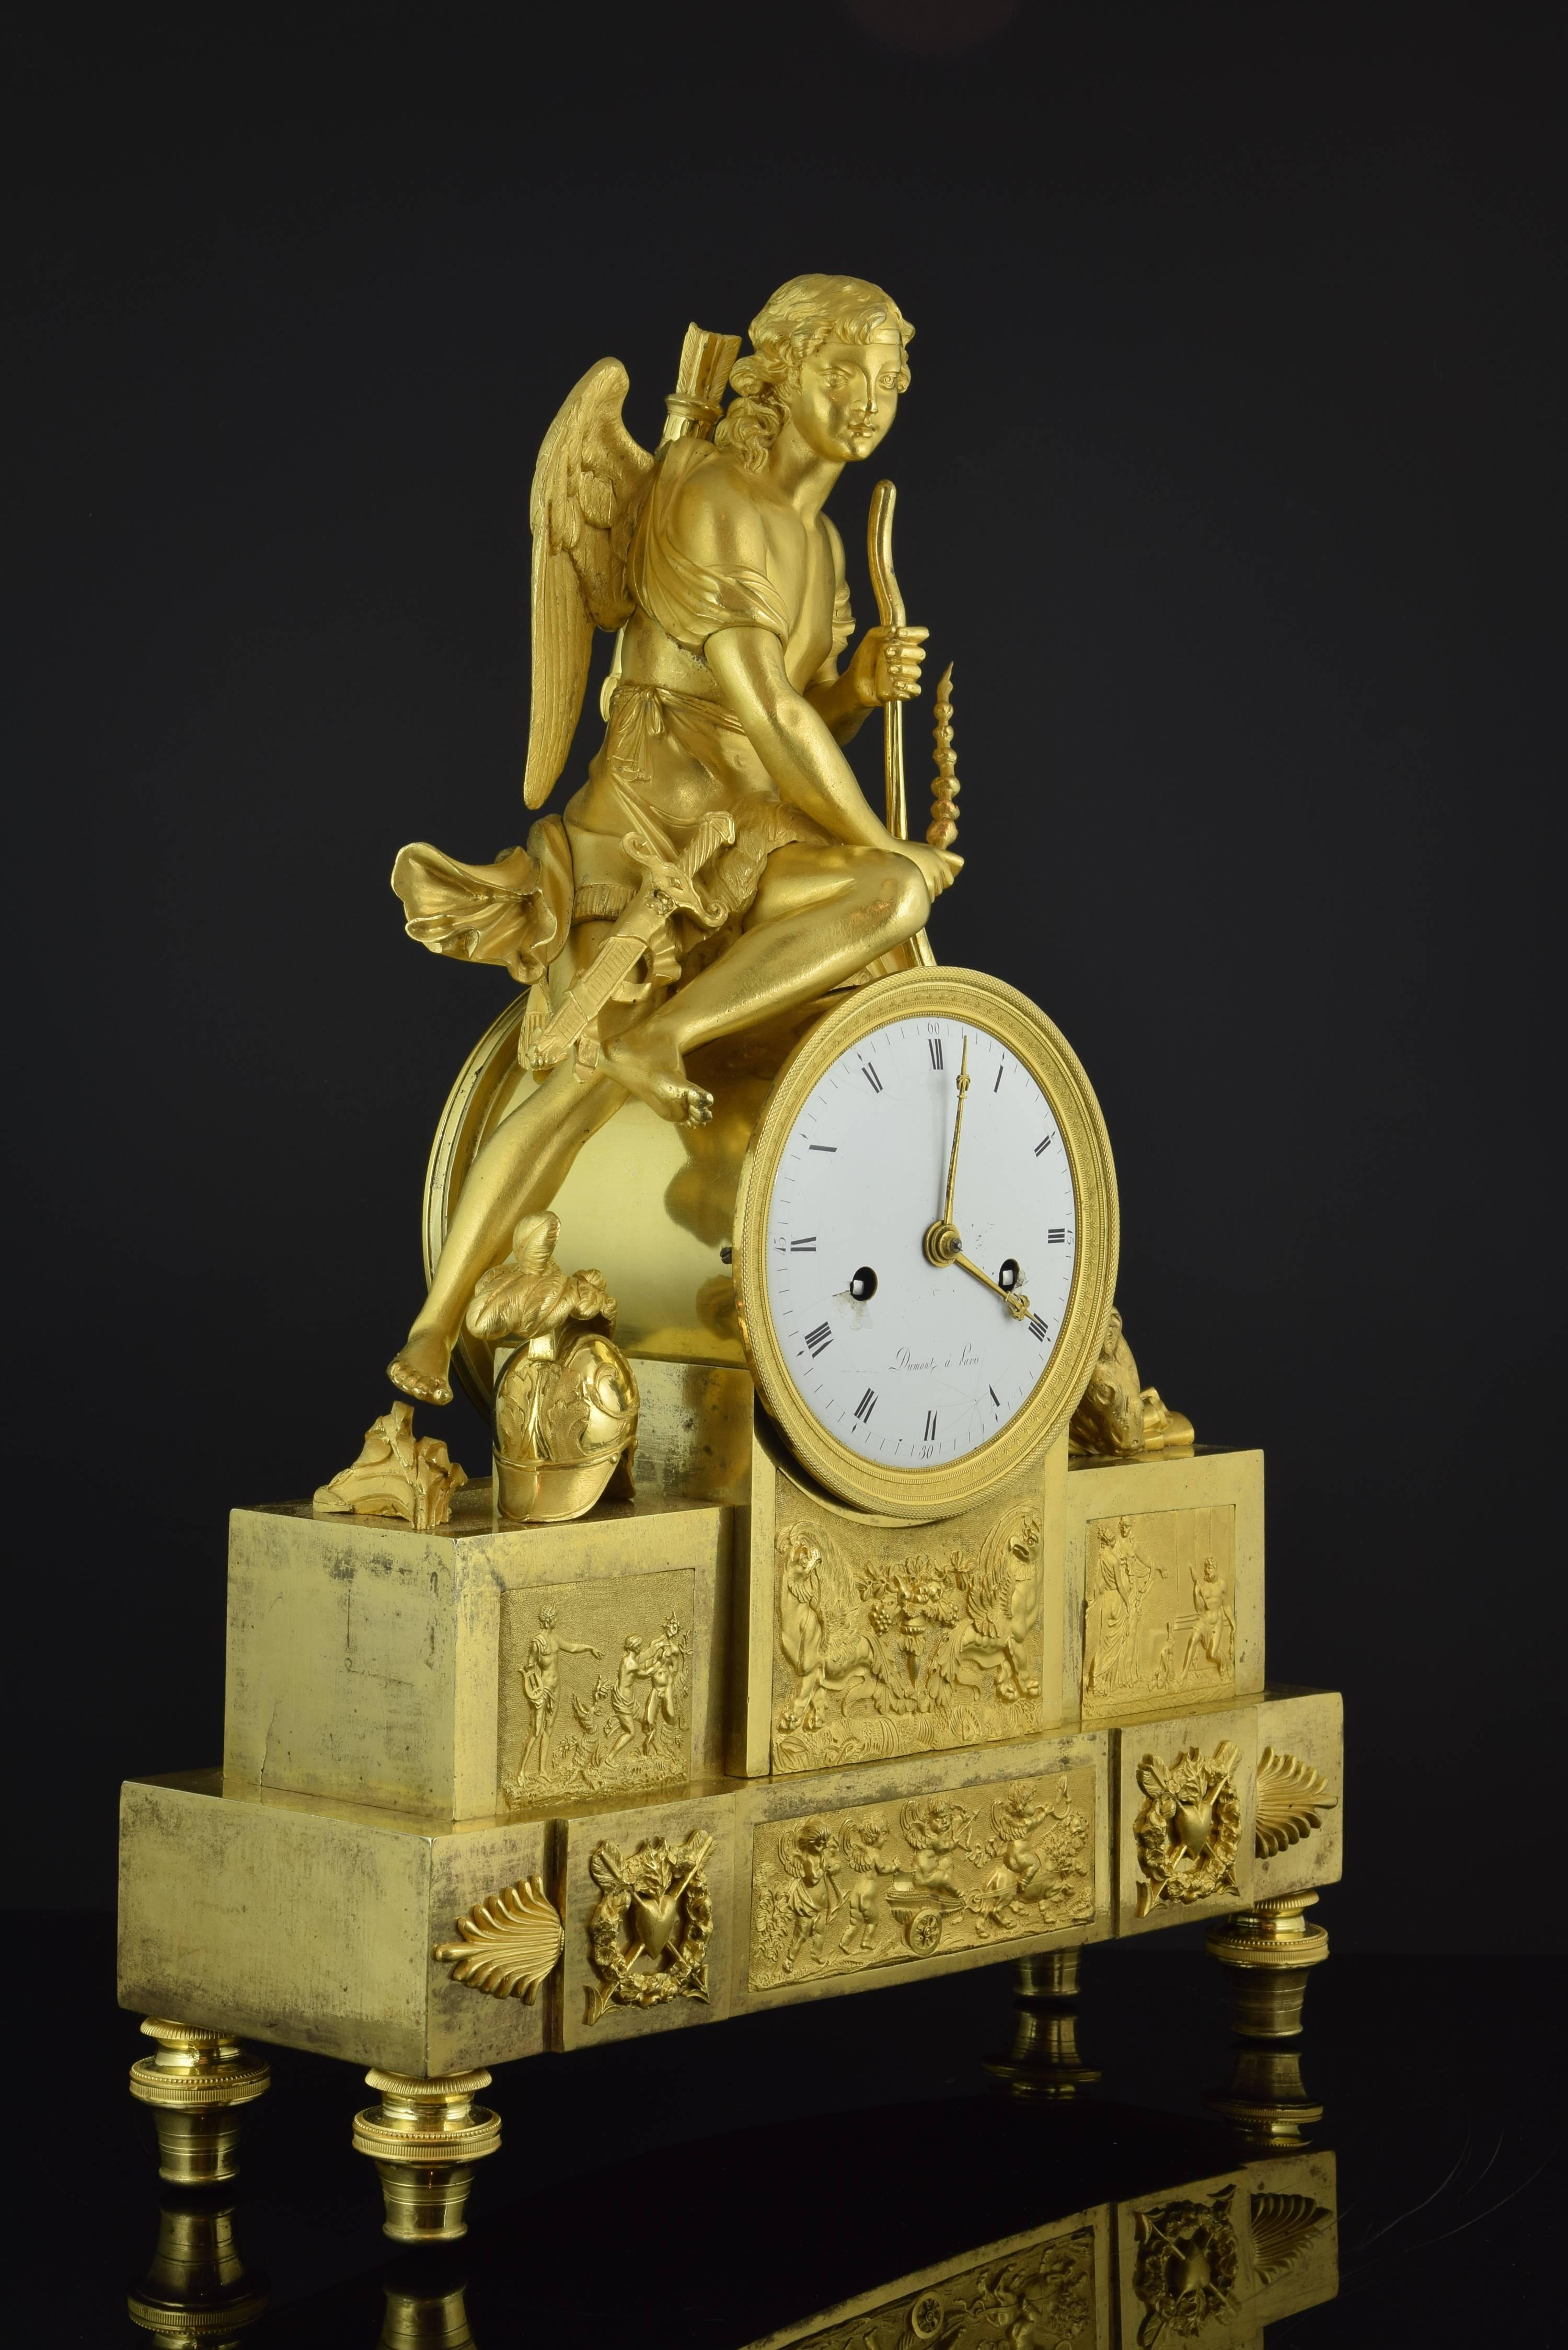 Table clock. Ormolu. Signed Dumont, Paris, France, 19th century.
Table clock with white dial, Roman numerals for hours and vertical lines for minutes, golden bronze hands and signature in black letters (Dumont à Paris). The body has small legs that